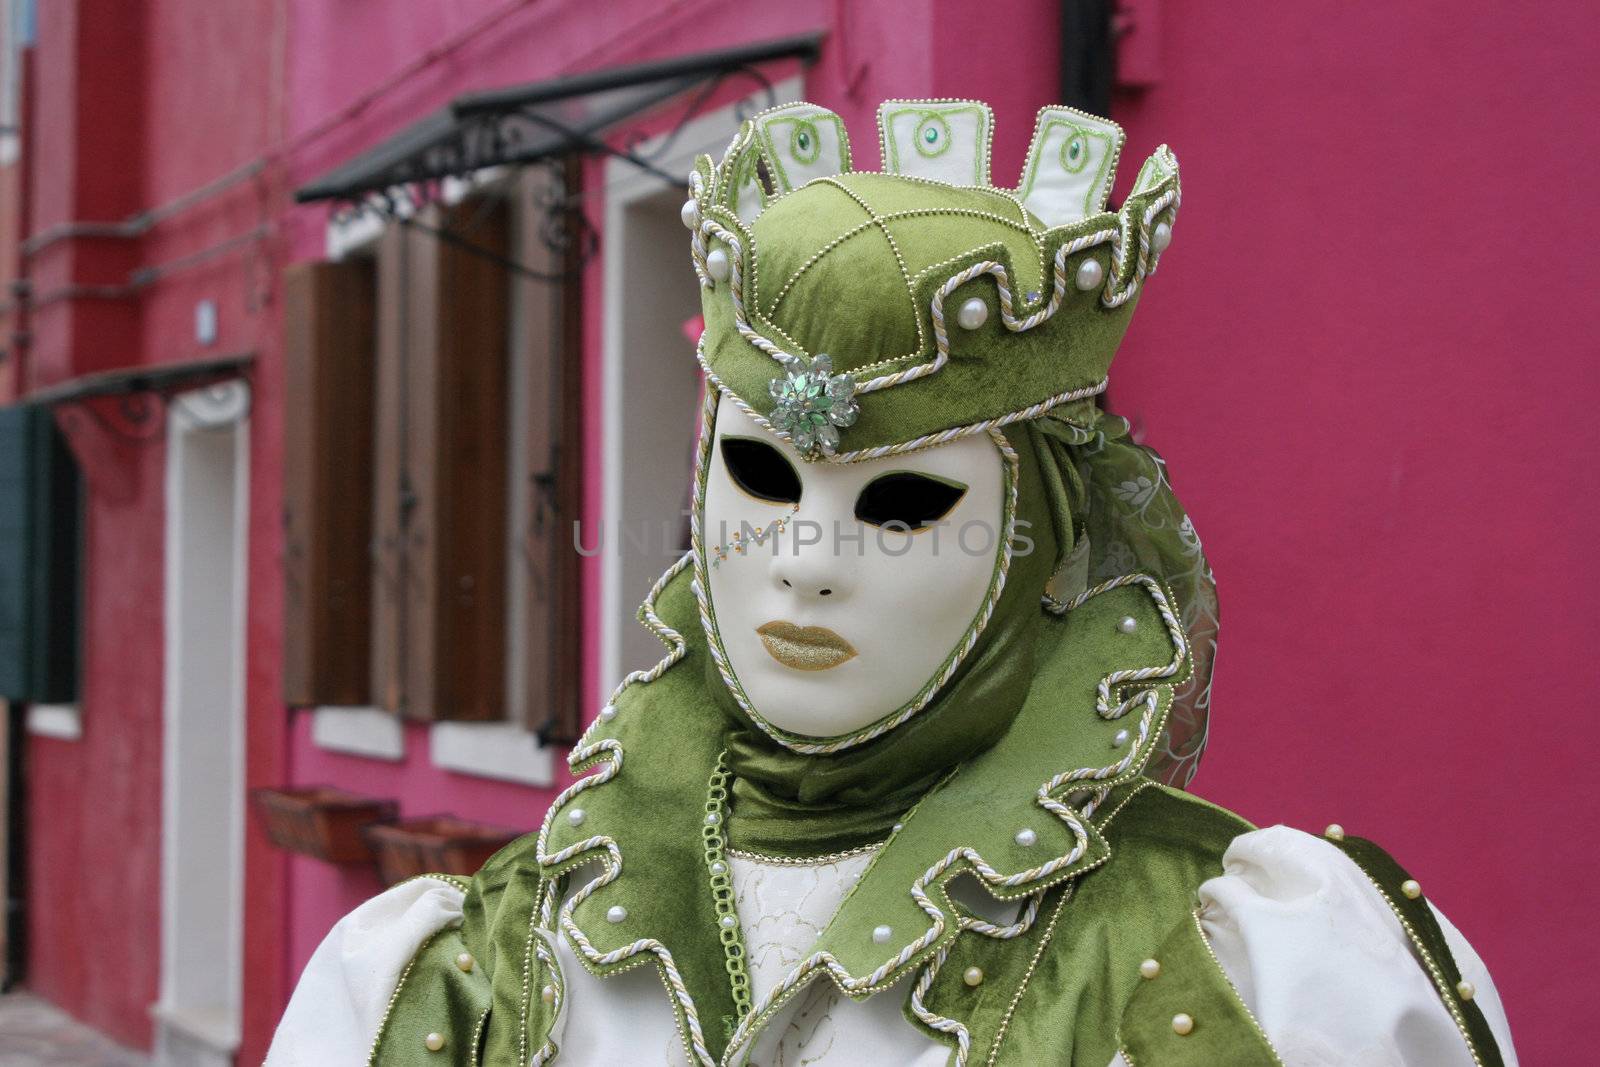 One of the masks in Venice carnival